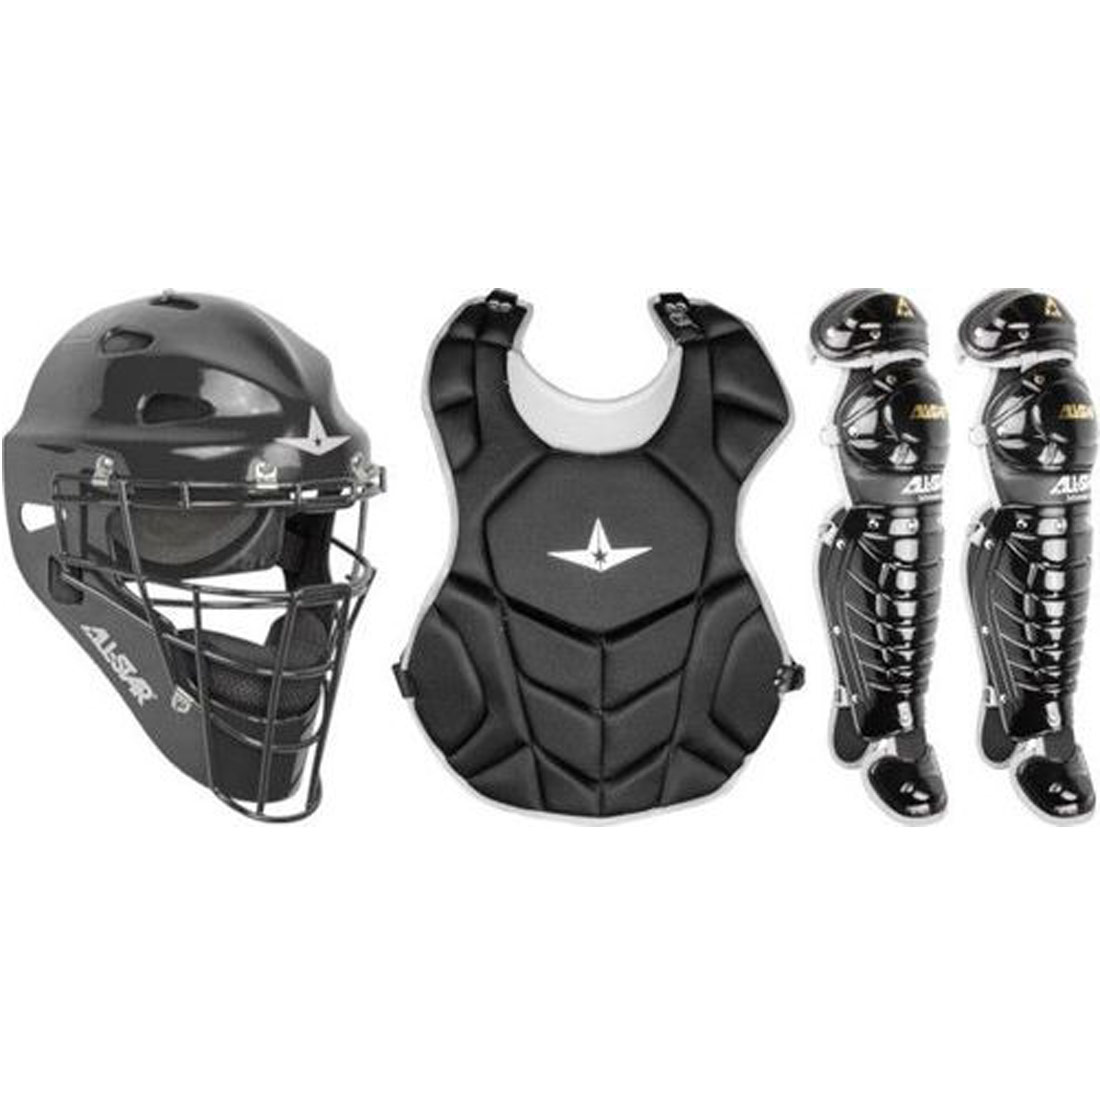 Ages 9-12 Youth Catcher's Gear Pack in BLACK 